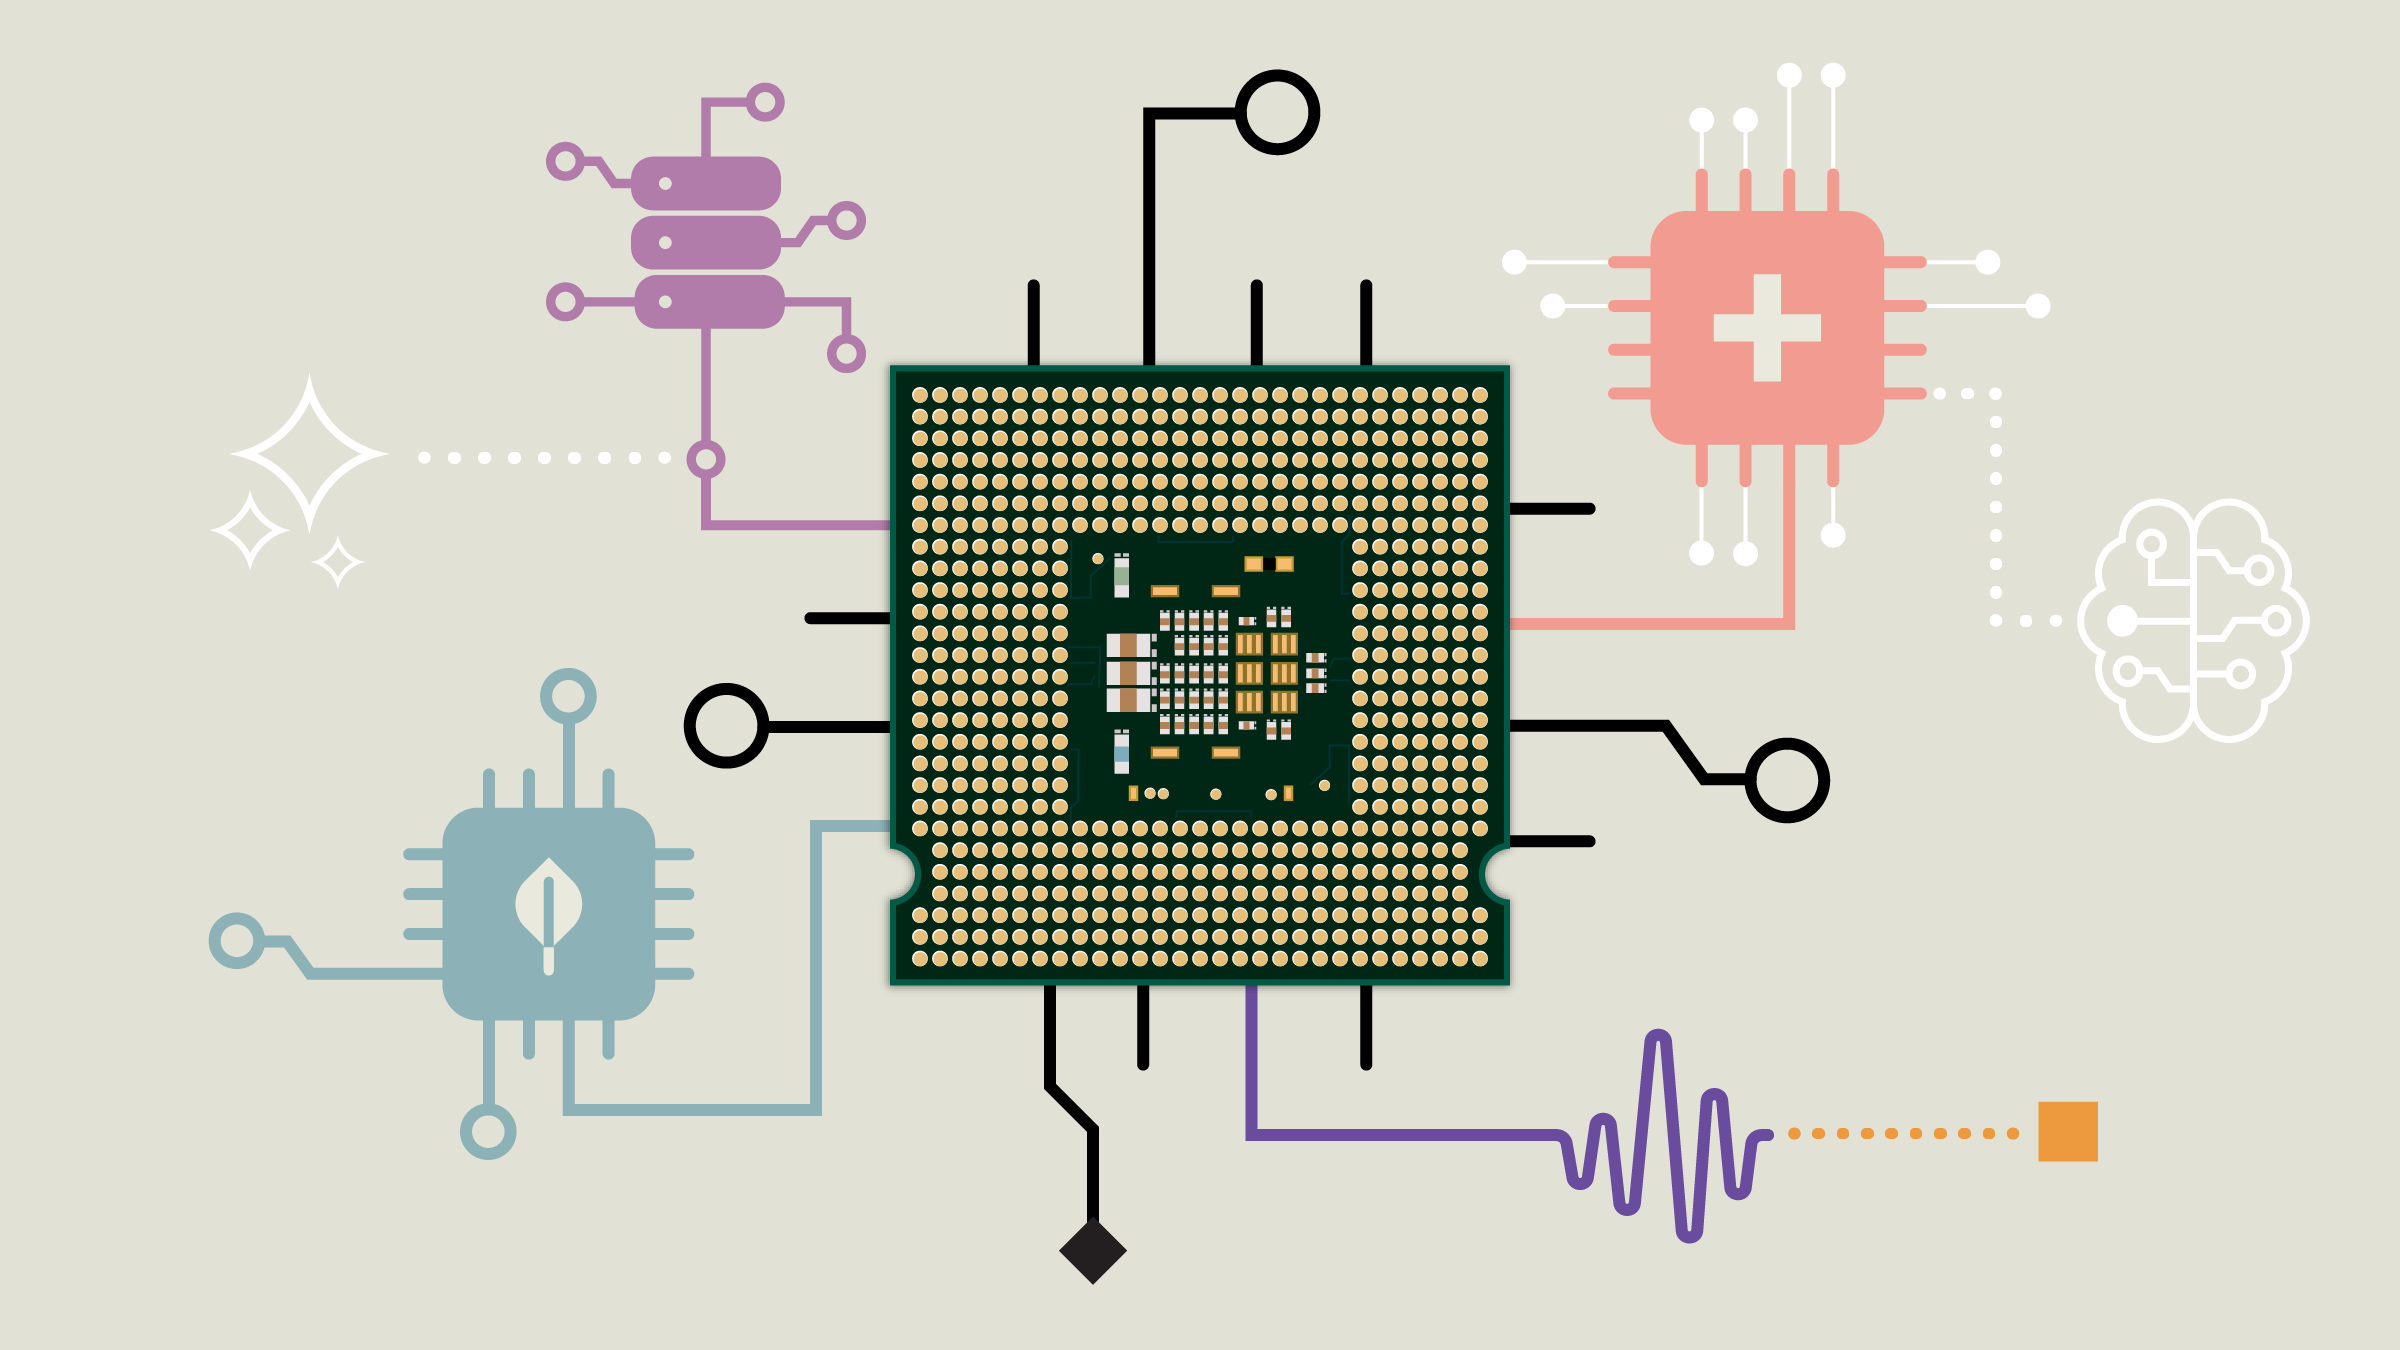 An illustration showing a close-up semiconductor chip connected to other semiconductor components, illustrating its integration in AI technology